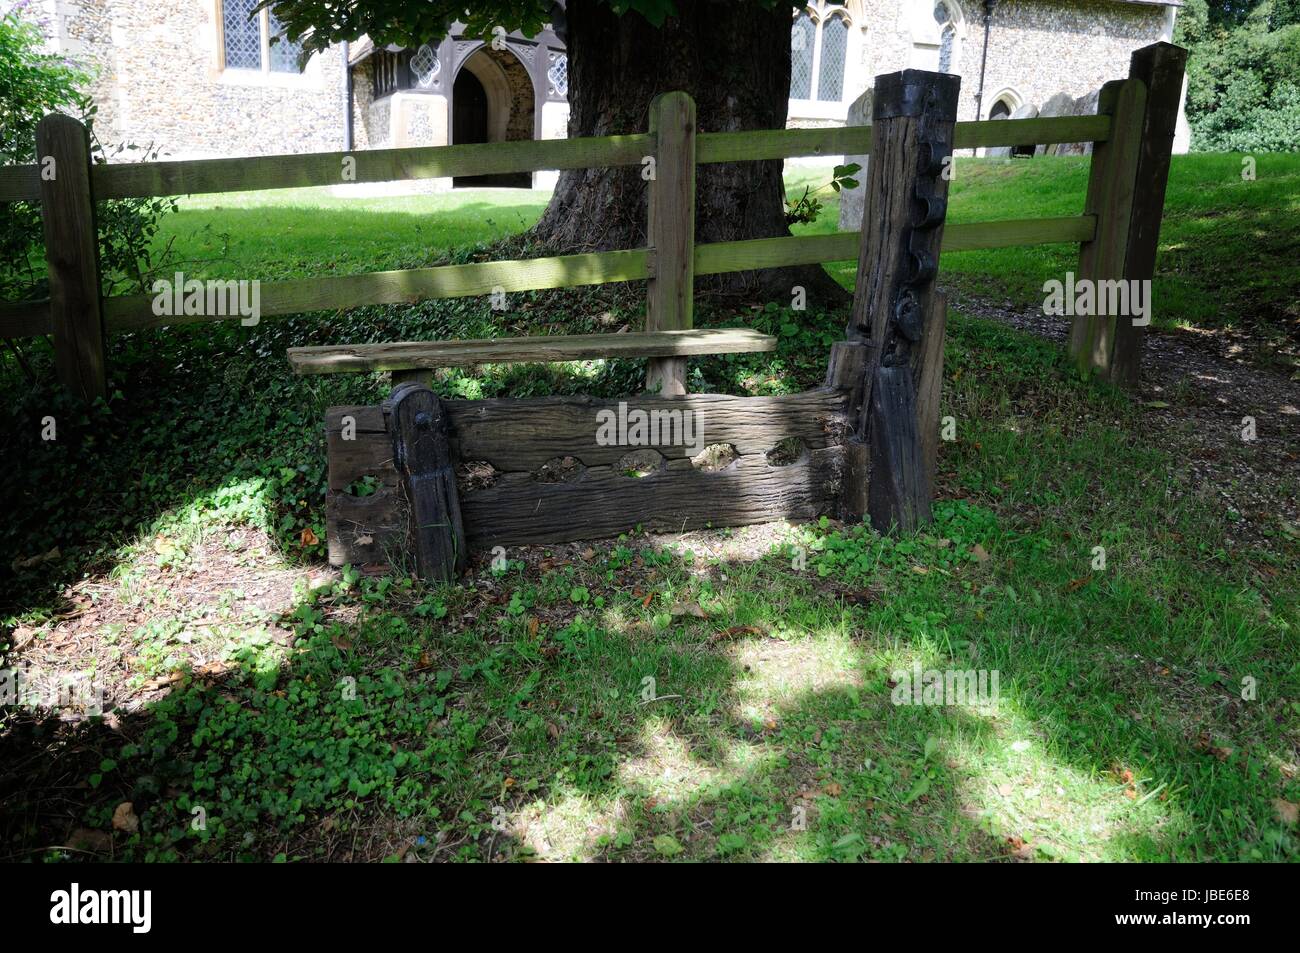 The Stocks and Whipping Post, Brent Pelham, Hertfordshire, are just outside the churchyard shaded by trees Stock Photo